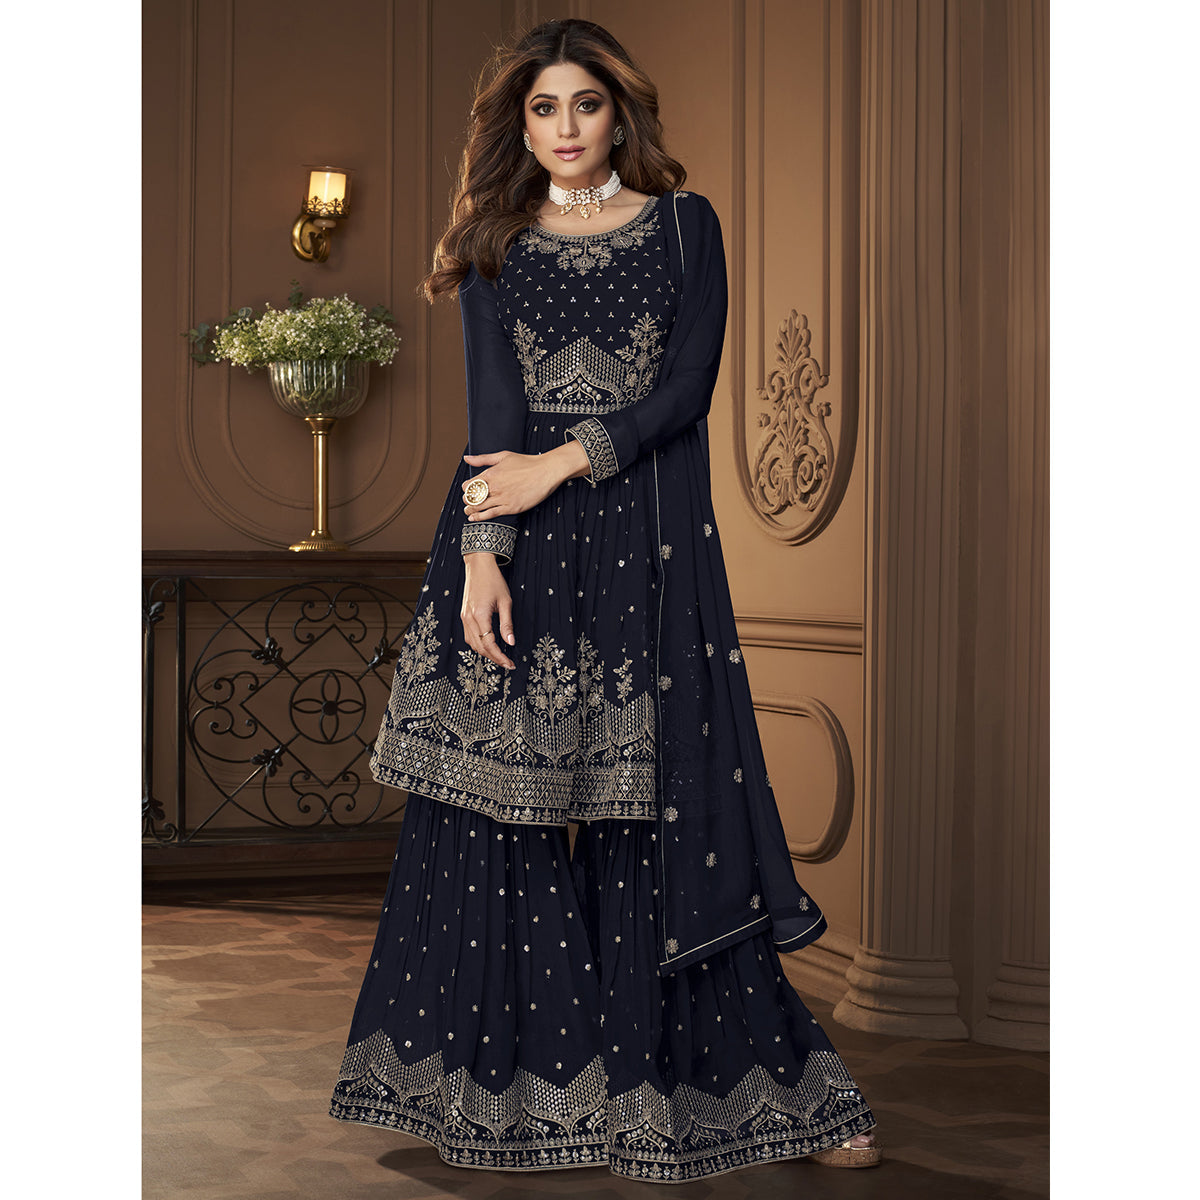 Shafnufab Heavy Faux Georgette Semi Stitched Plazzo Suit In BLUE COLOR